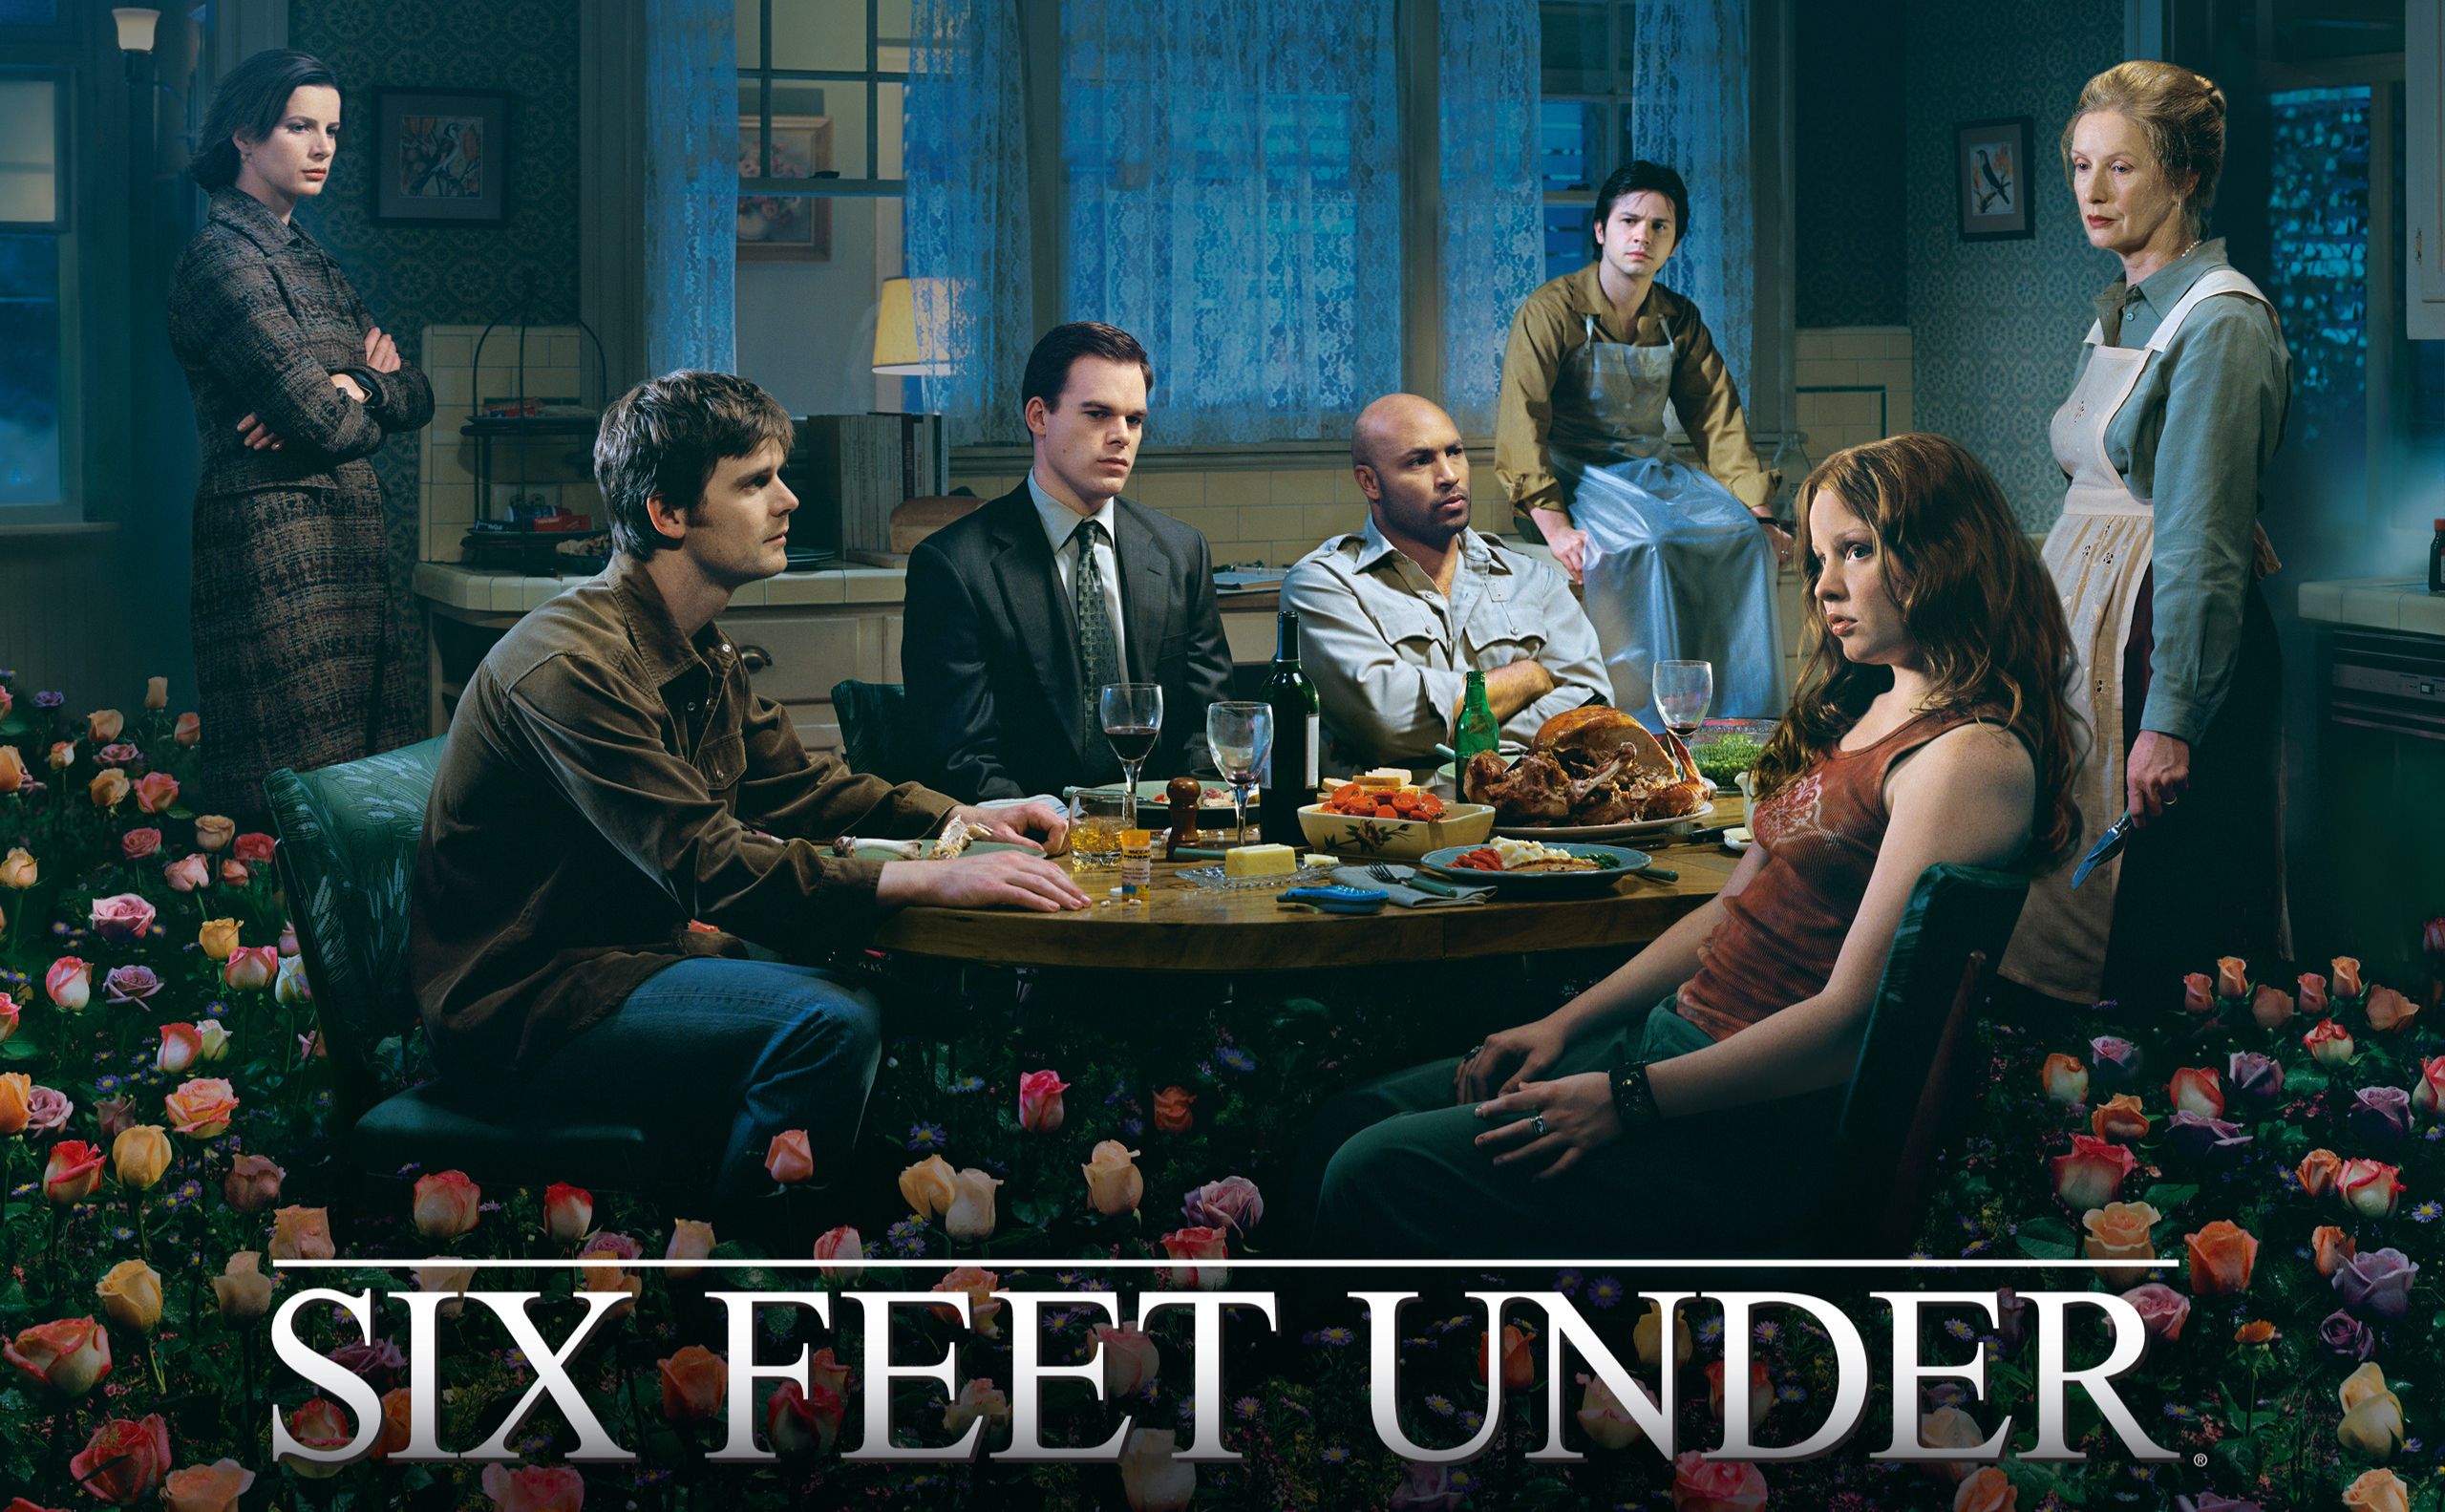 Six Feet Under' Follow-Up in Early Development at HBO (EXCLUSIVE)